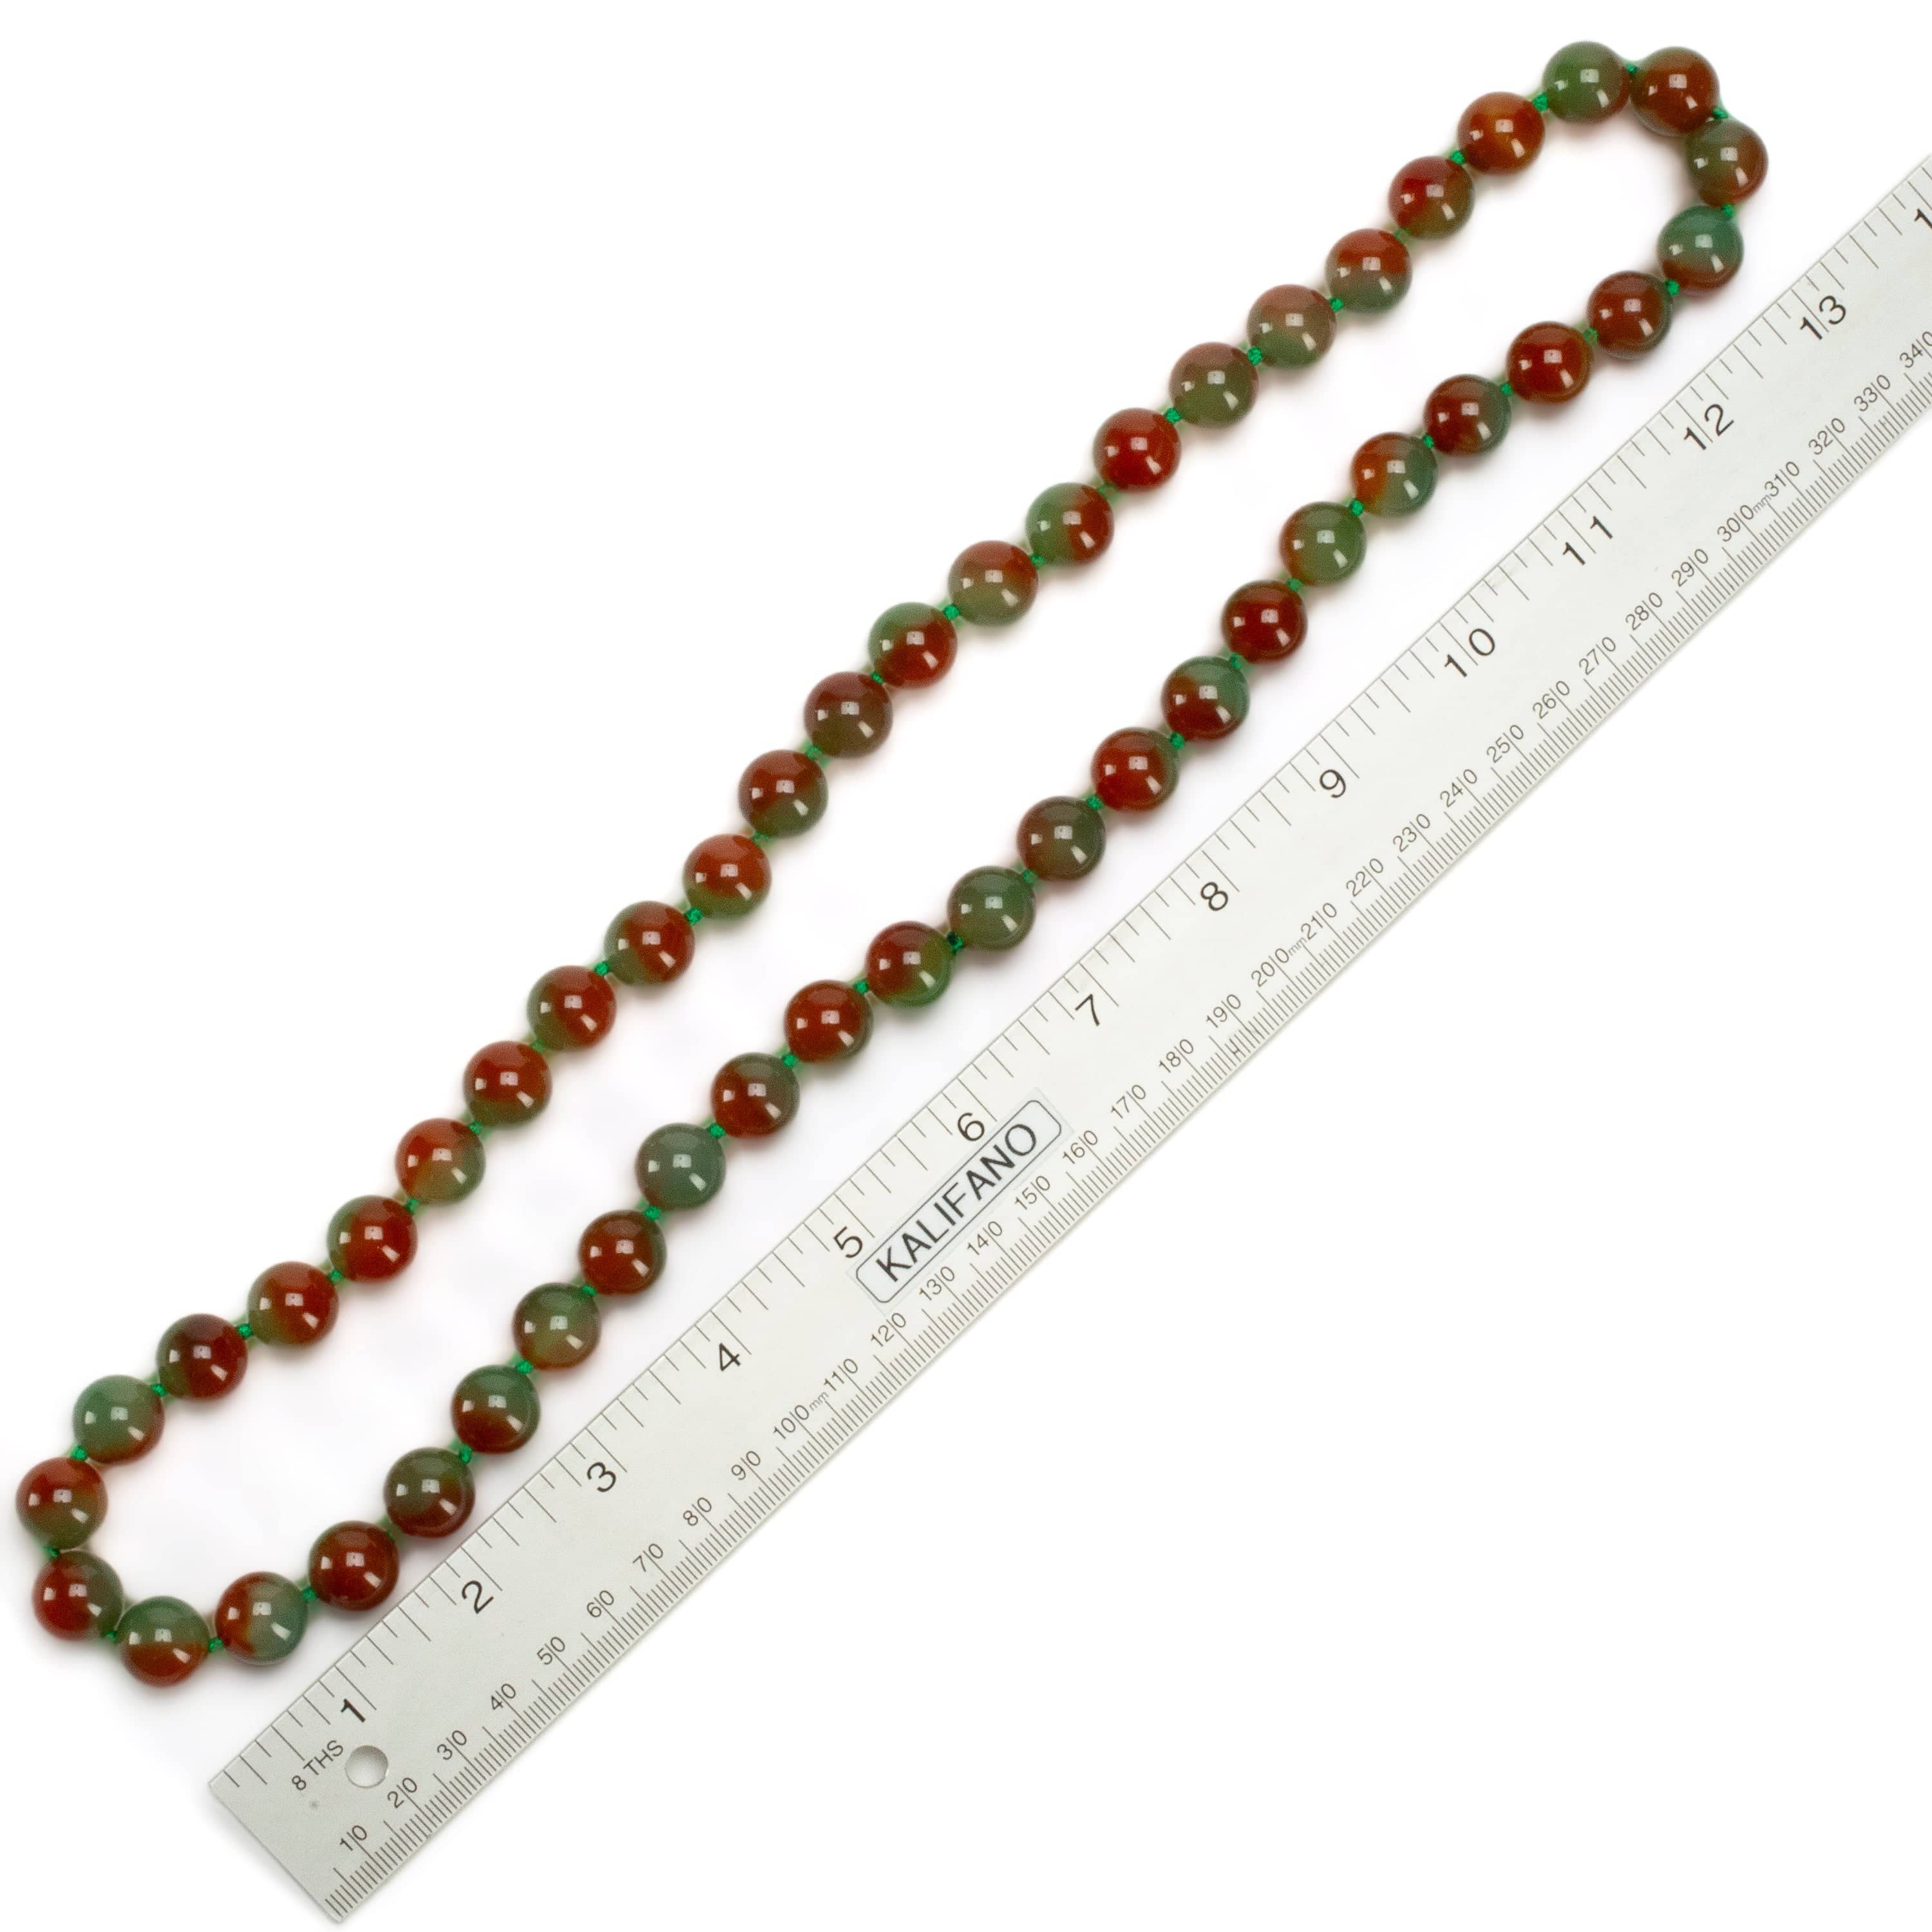 Kalifano Jewelry GOLD-NGP-100 - Red and Green Agate Necklace GOLD-NGP-100